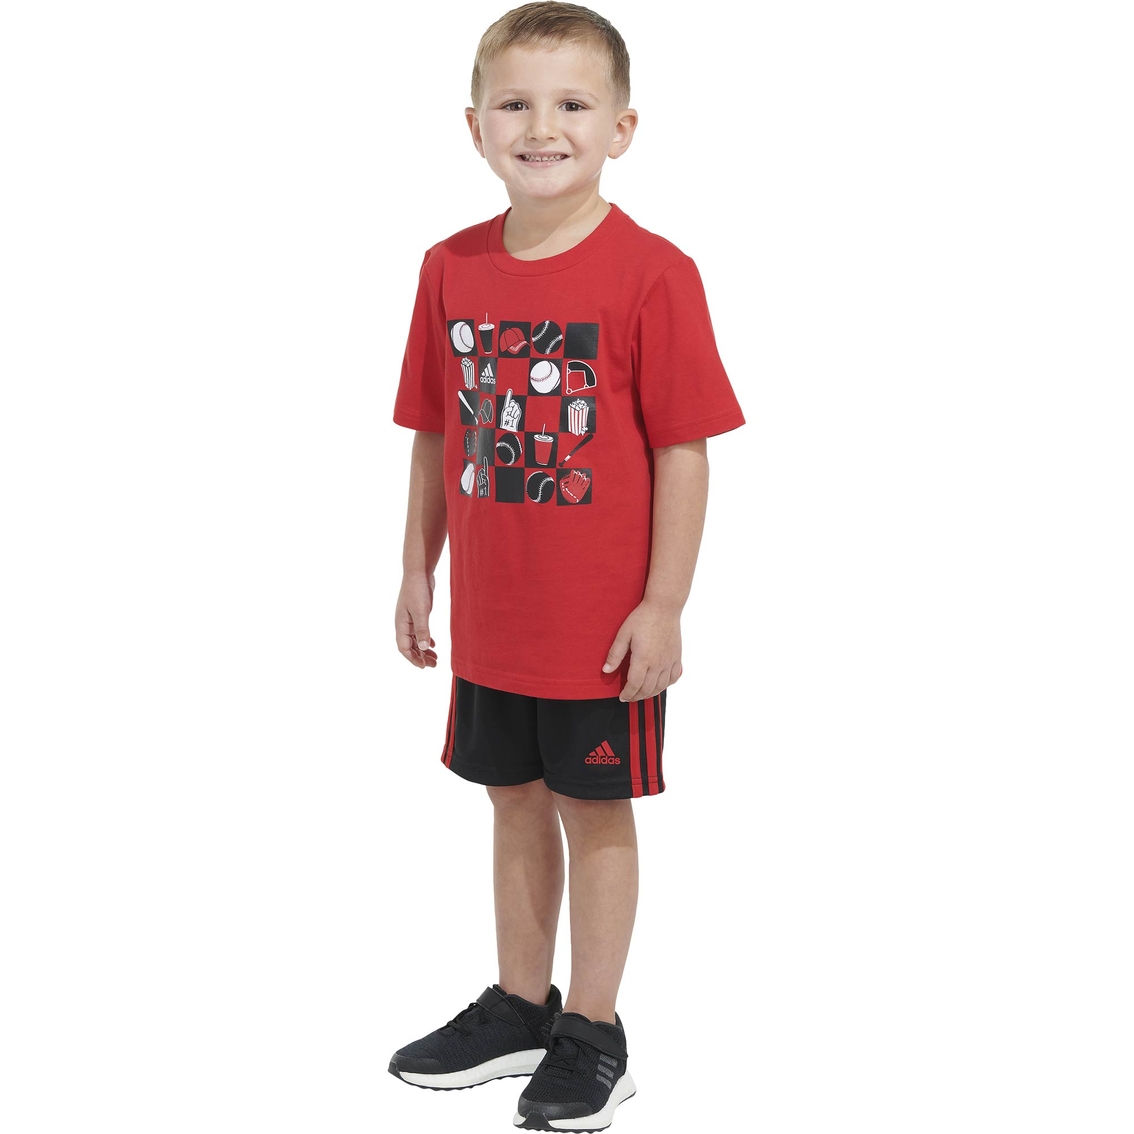 Adidas Toddler Boys Cotton Graphic Tee and Shorts Set - Image 4 of 7